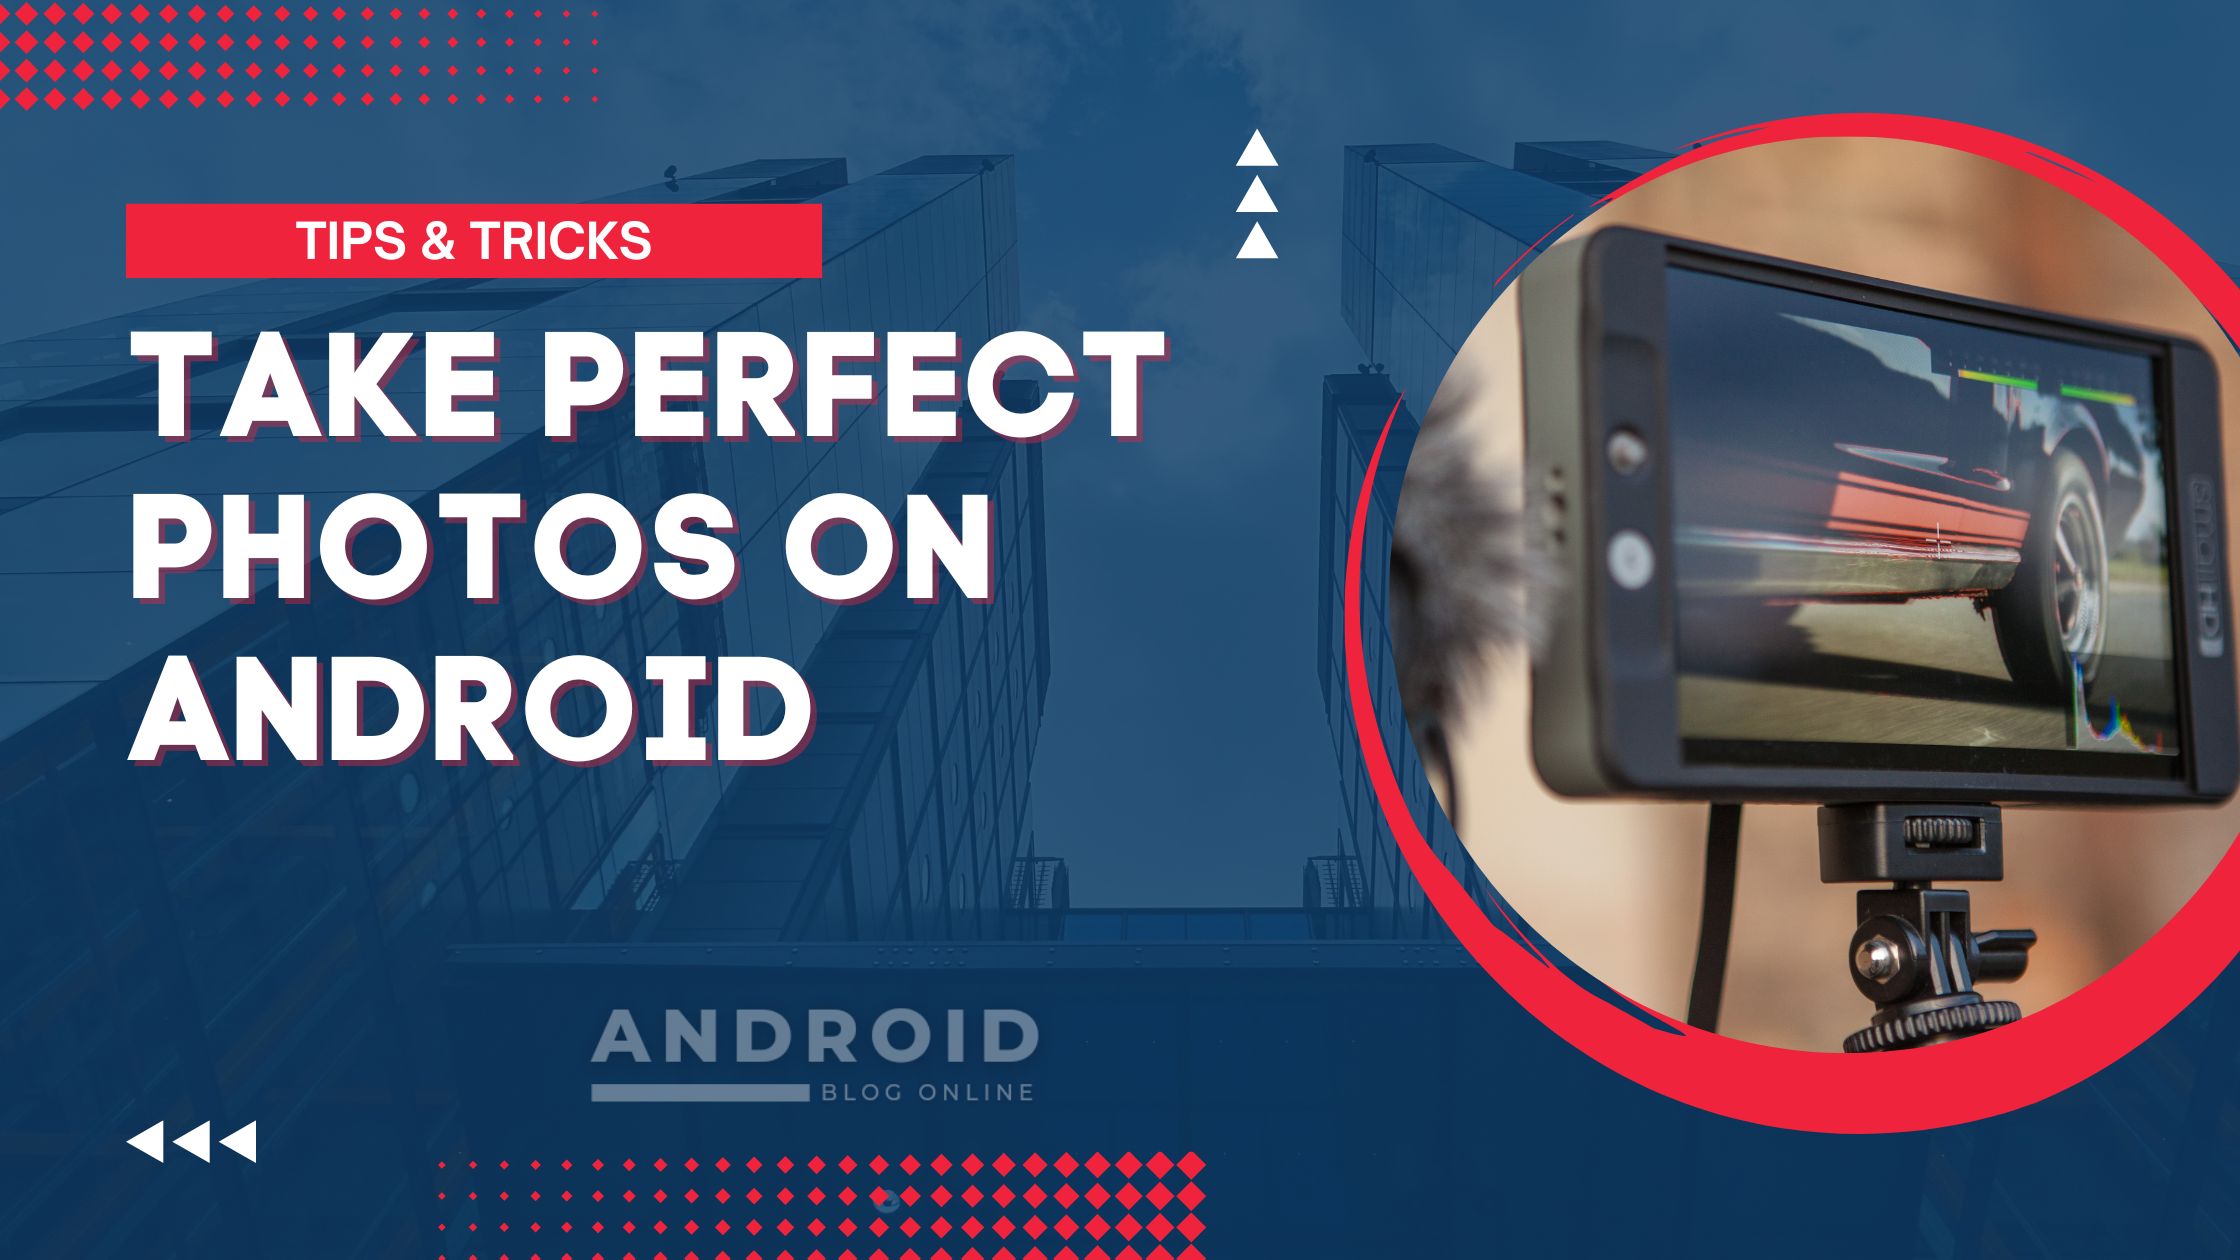 How to take perfect photos on Android phone